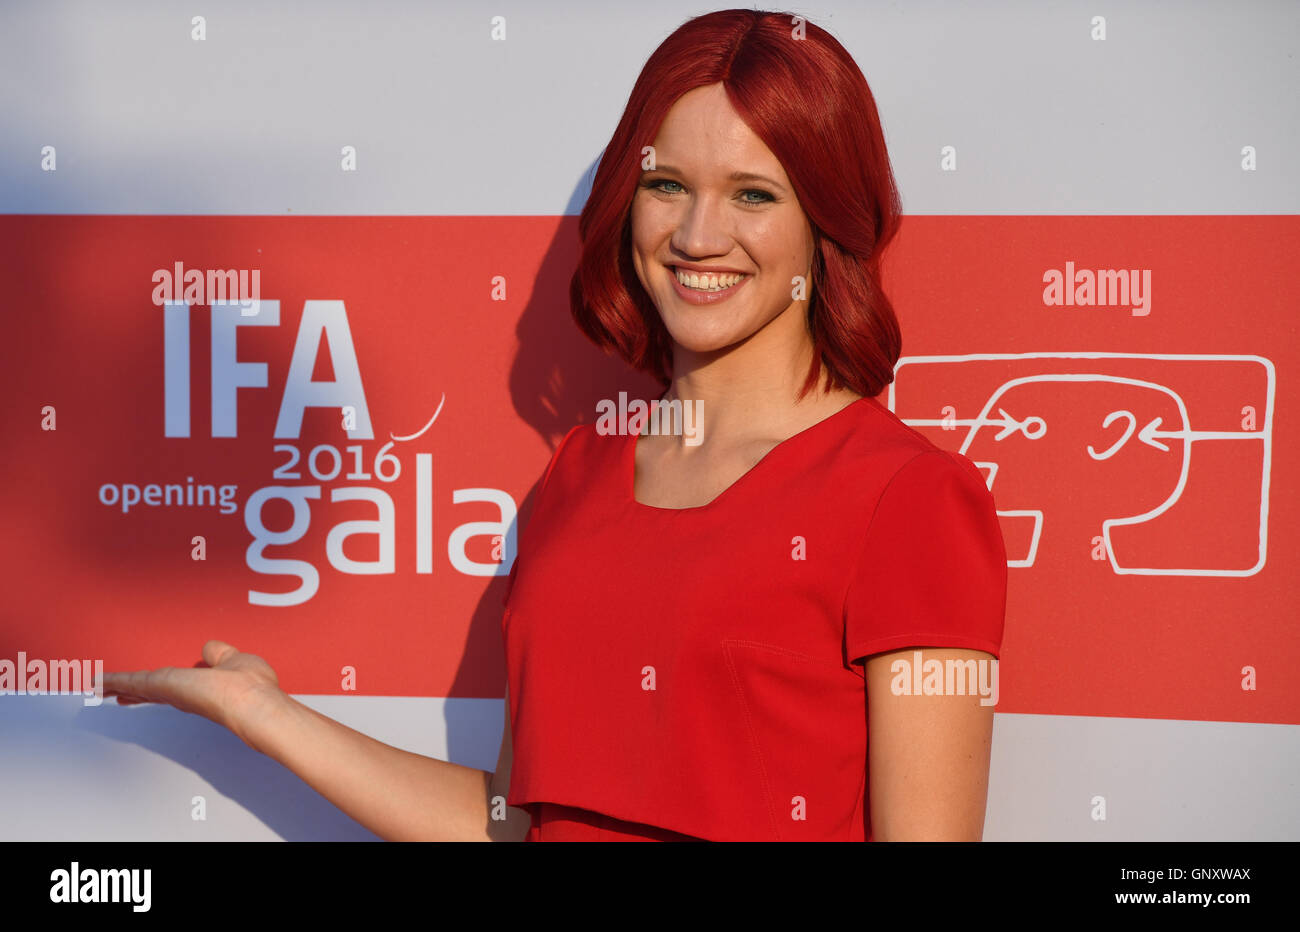 Berlin, Germany. 1st Sep, 2016. 'Miss IFA' arrives to the opening gala at the IFA electronics fair in Berlin, Germany, 1 September 2016. The IFA is known as the world's largest fair for entertainment technology, IT and household appliances. The IFA takes place from 2 to 7 September 2016. PHOTO: SOEREN STACHE/dpa/Alamy Live News Stock Photo